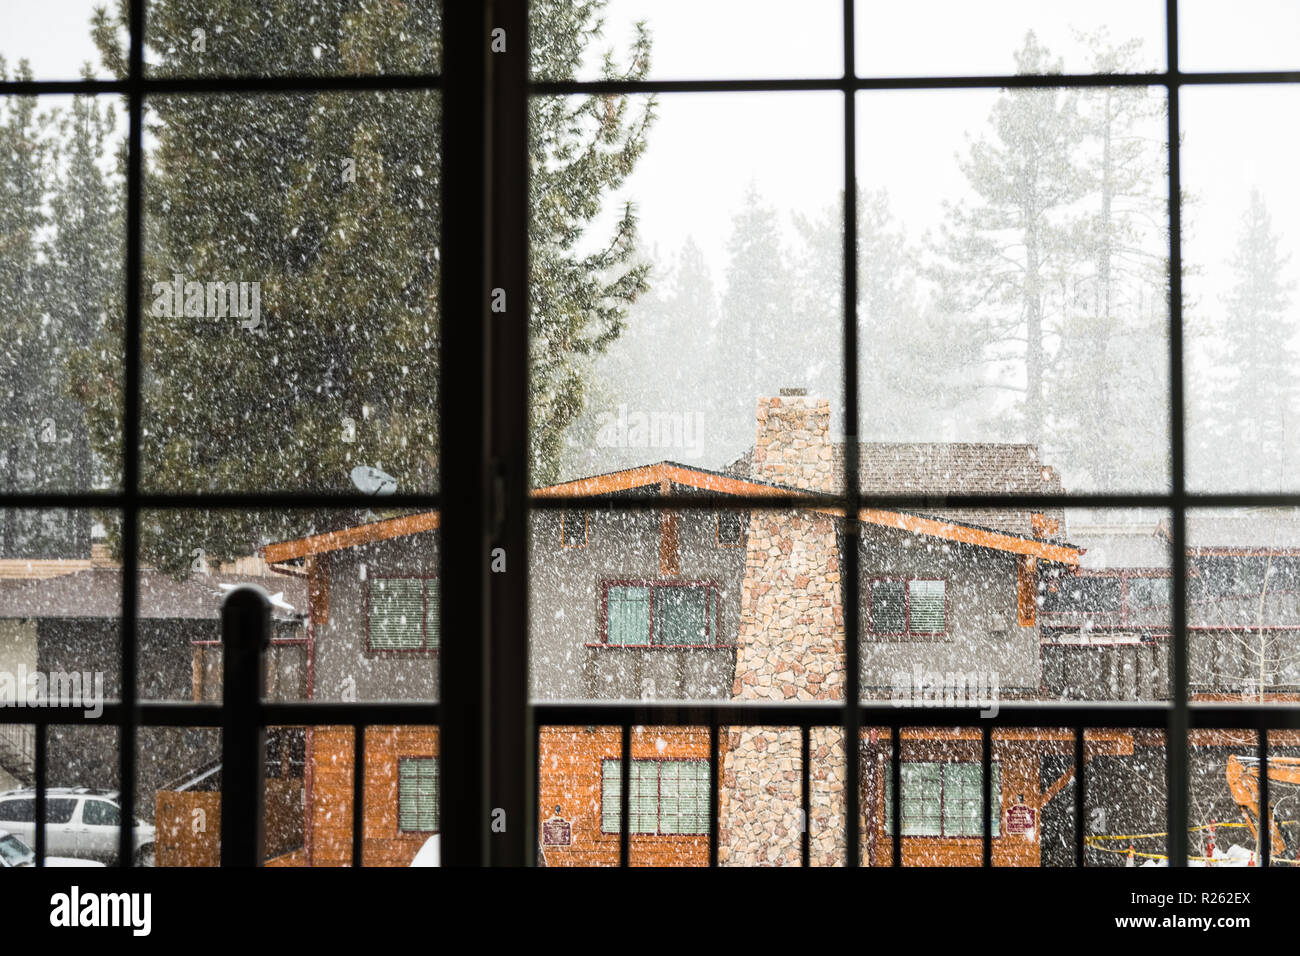 Looking outside through a window at falling snow, South Lake Tahoe, California Stock Photo